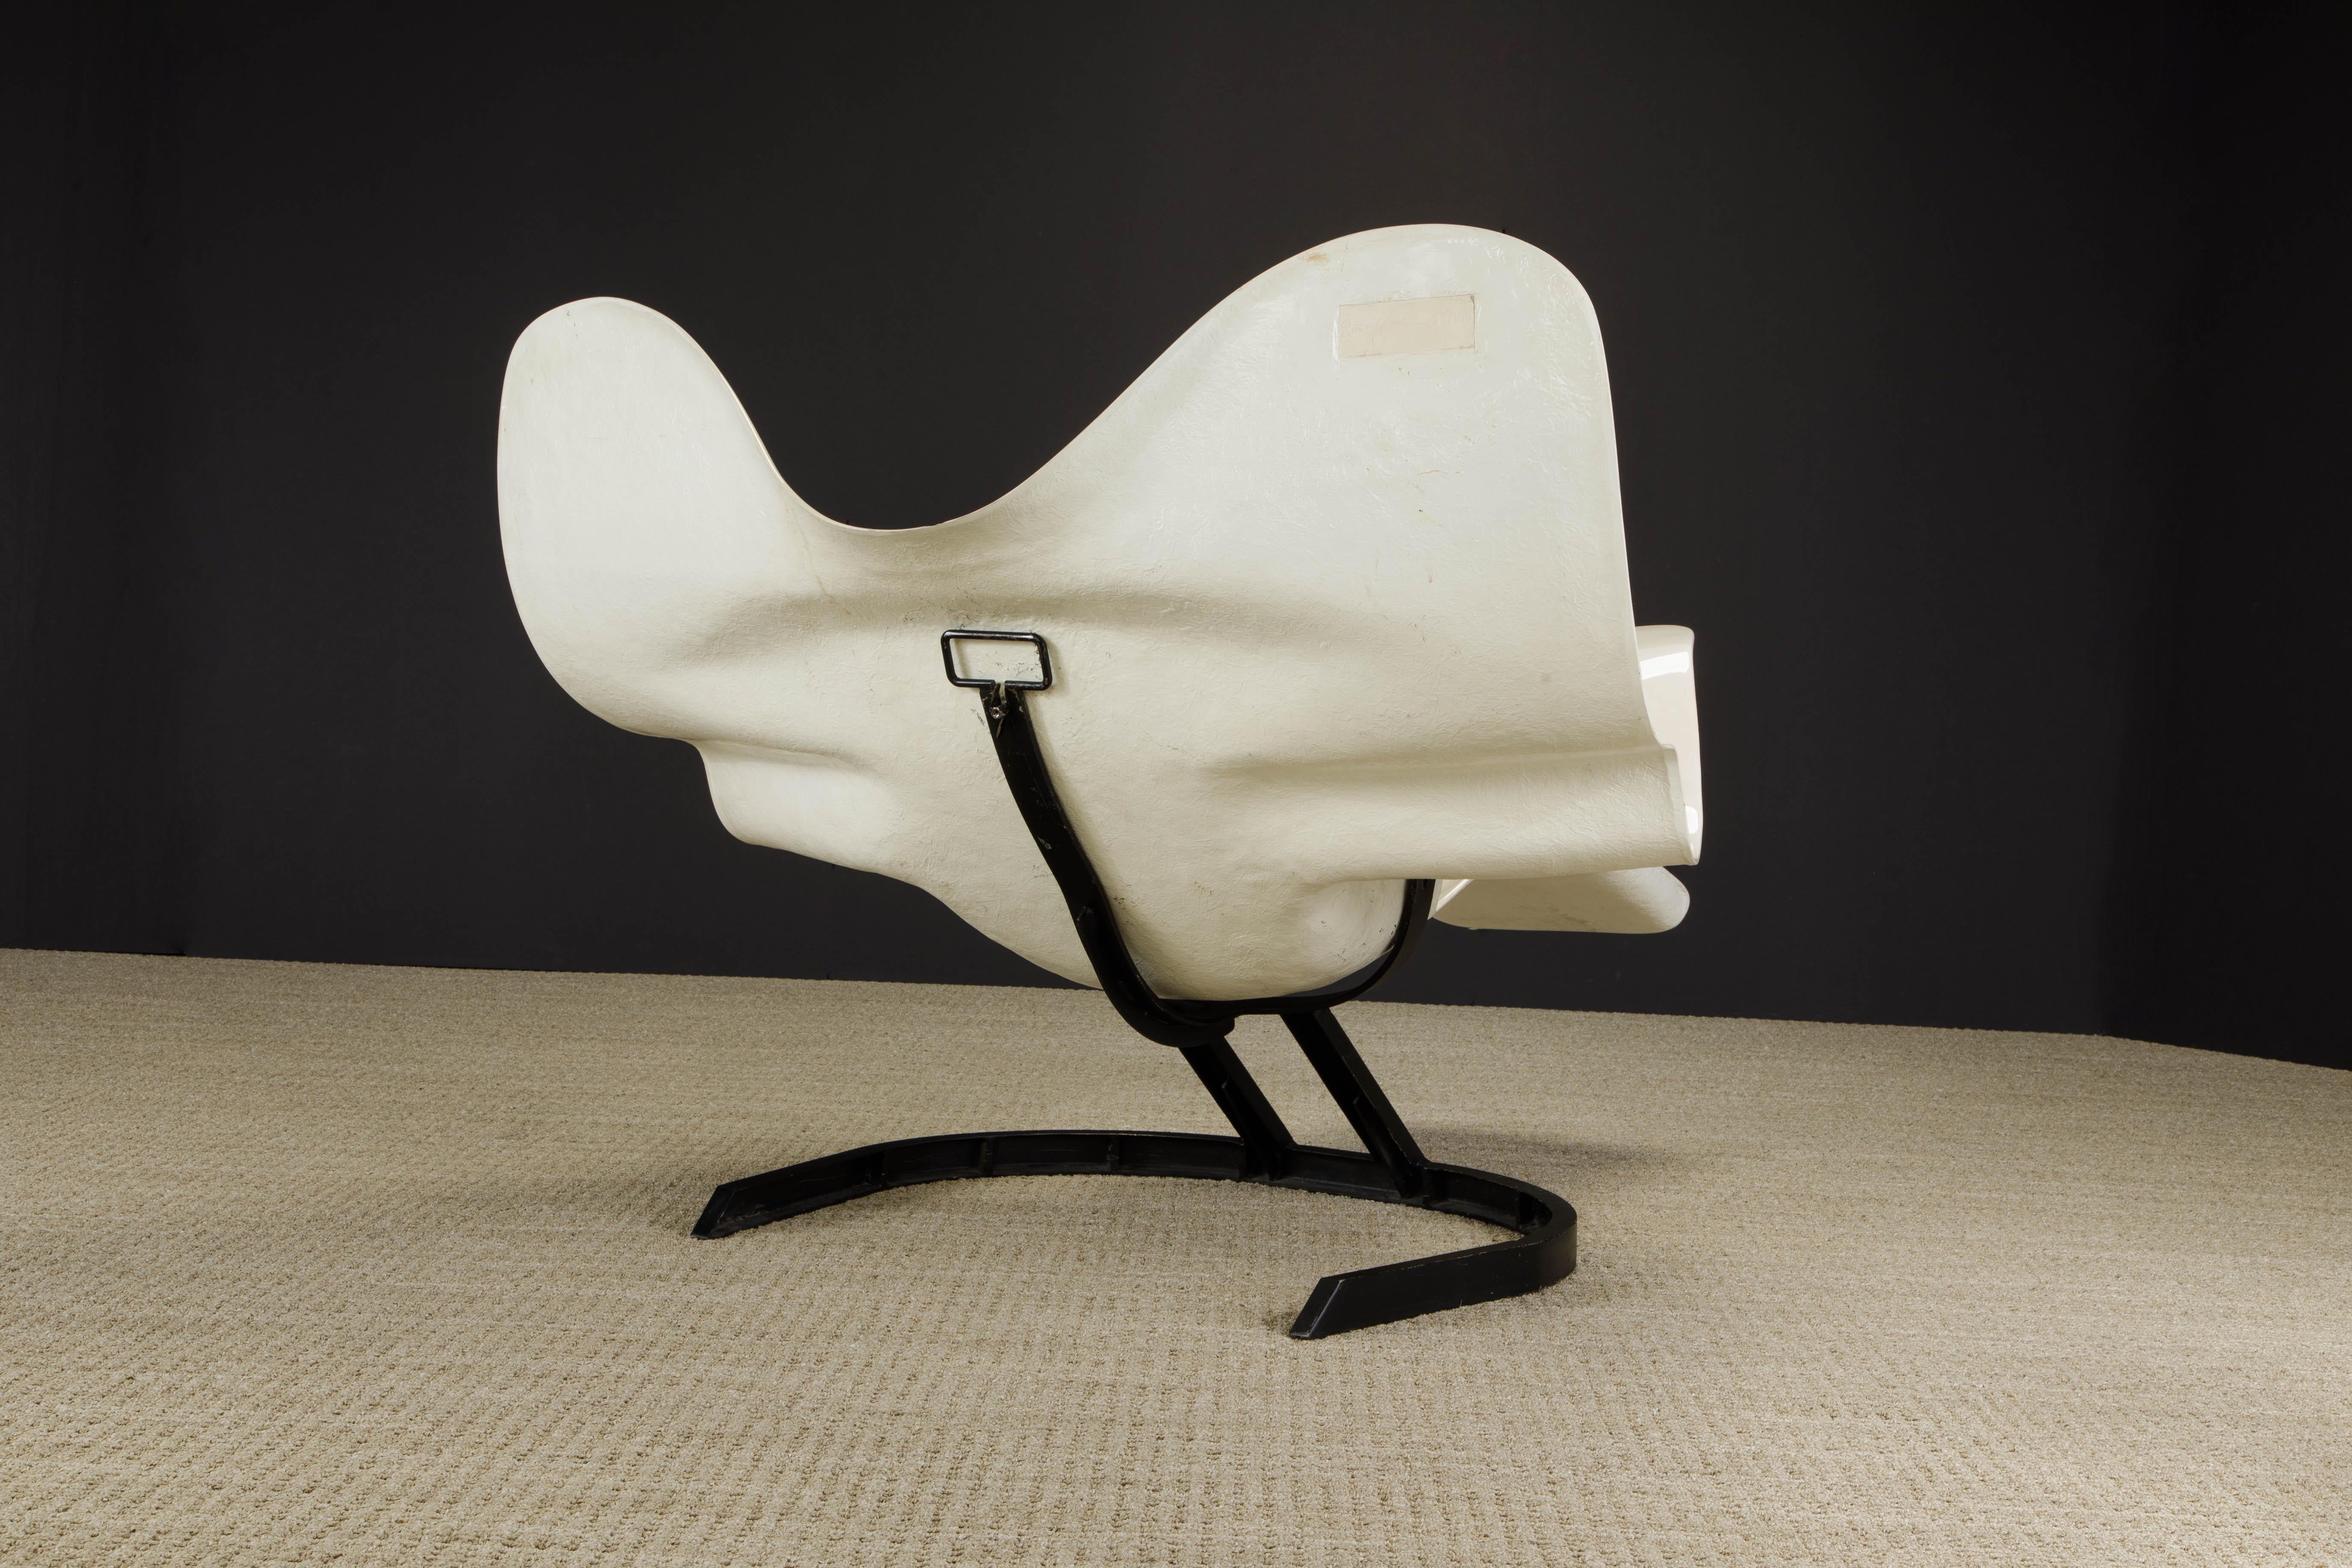 Limited Edition 'Elephant Chair' by Bernard Rancillac, 1985, Signed & Numbered 7